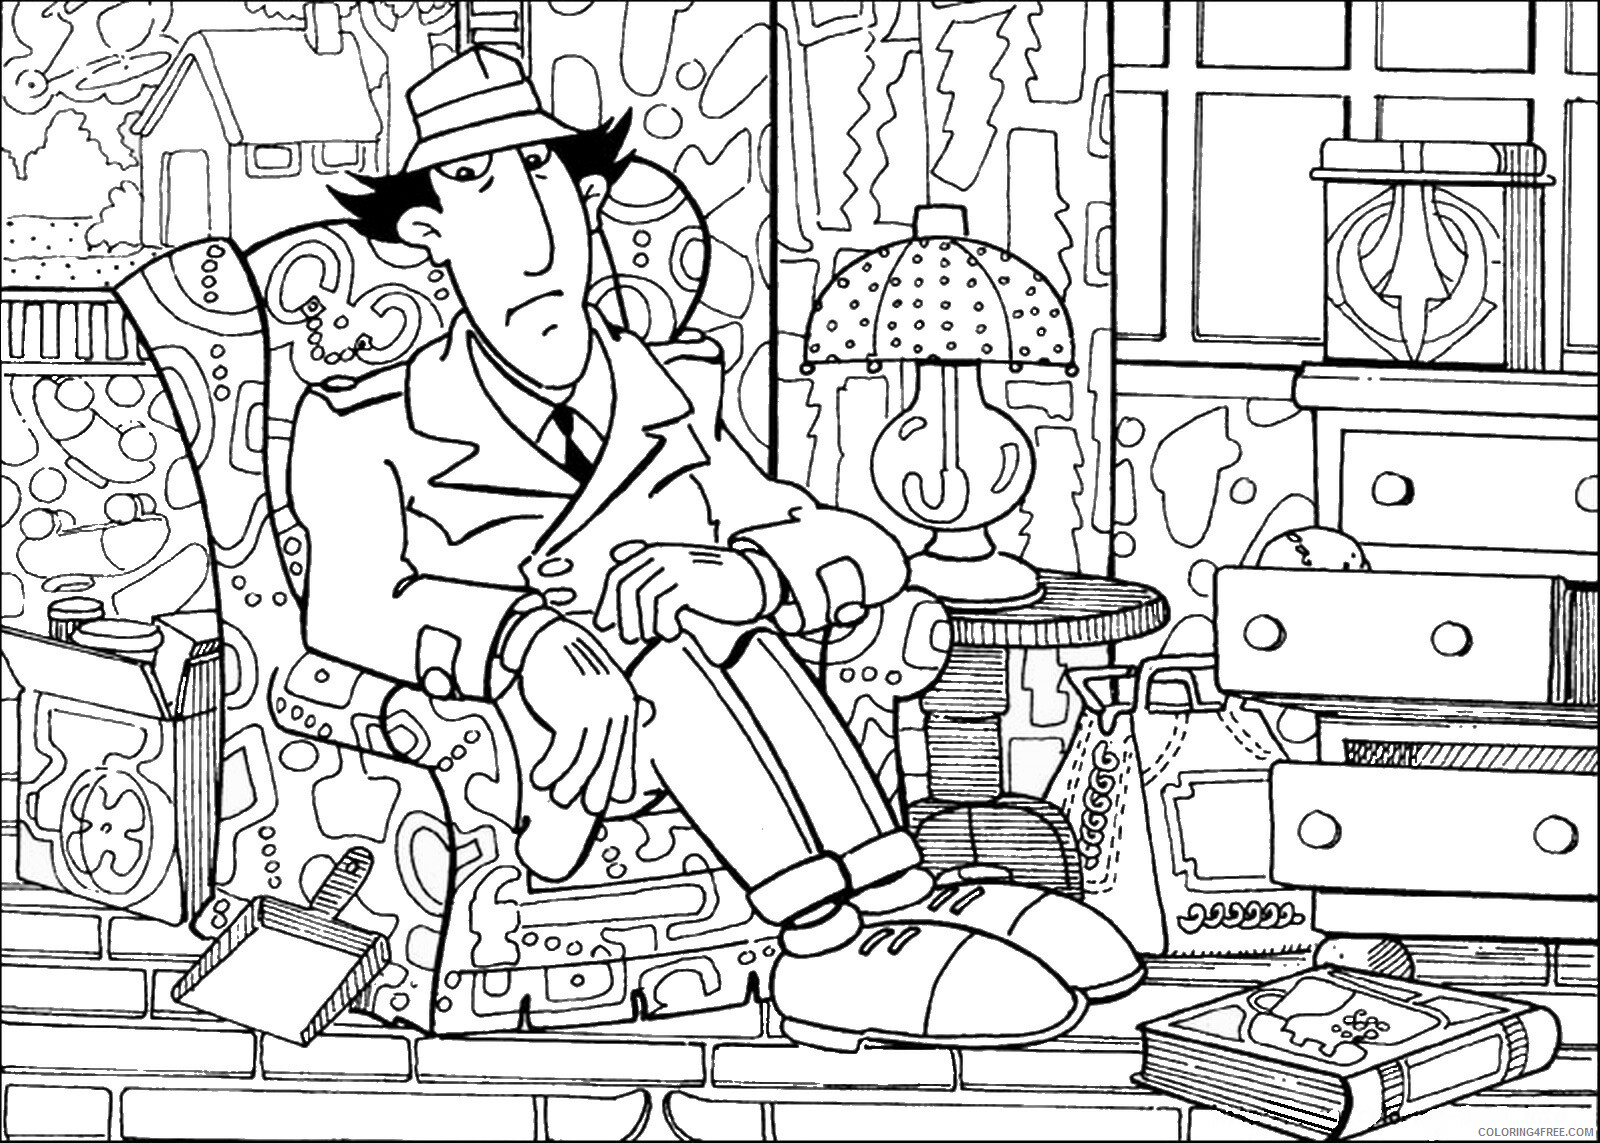 Inspector Gadget Coloring Pages TV Film inspector_gadget_11 Printable 2020 04006 Coloring4free